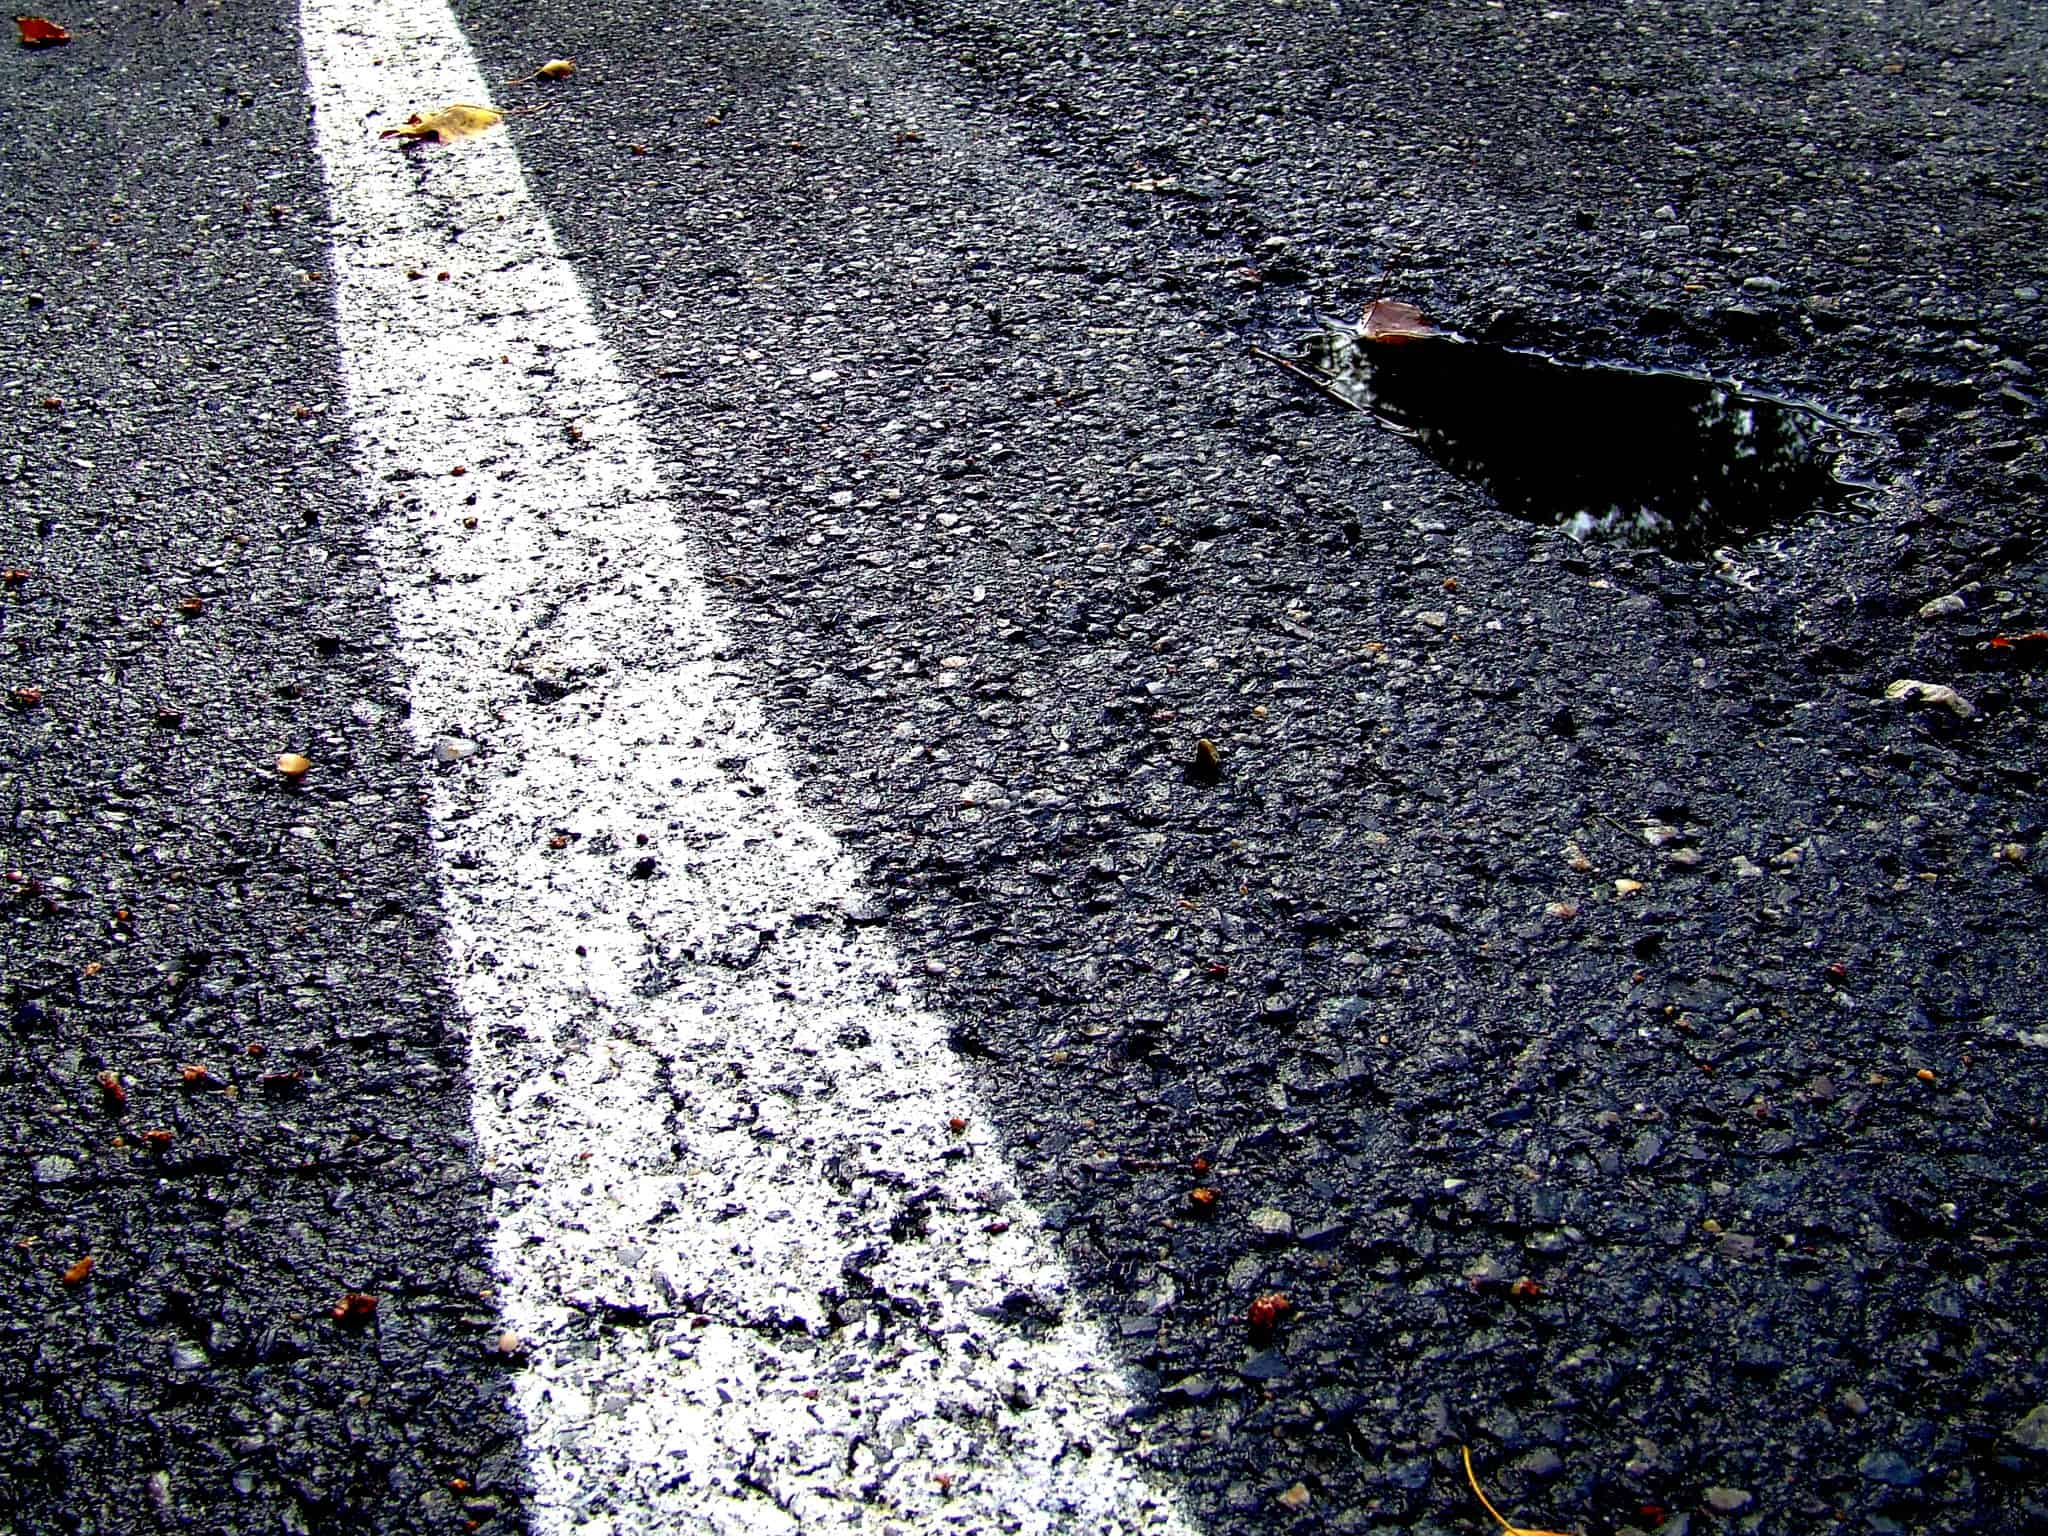 The council aims to respond to serious potholes within two hours (Image: Joshua Davis / CC 2.0)